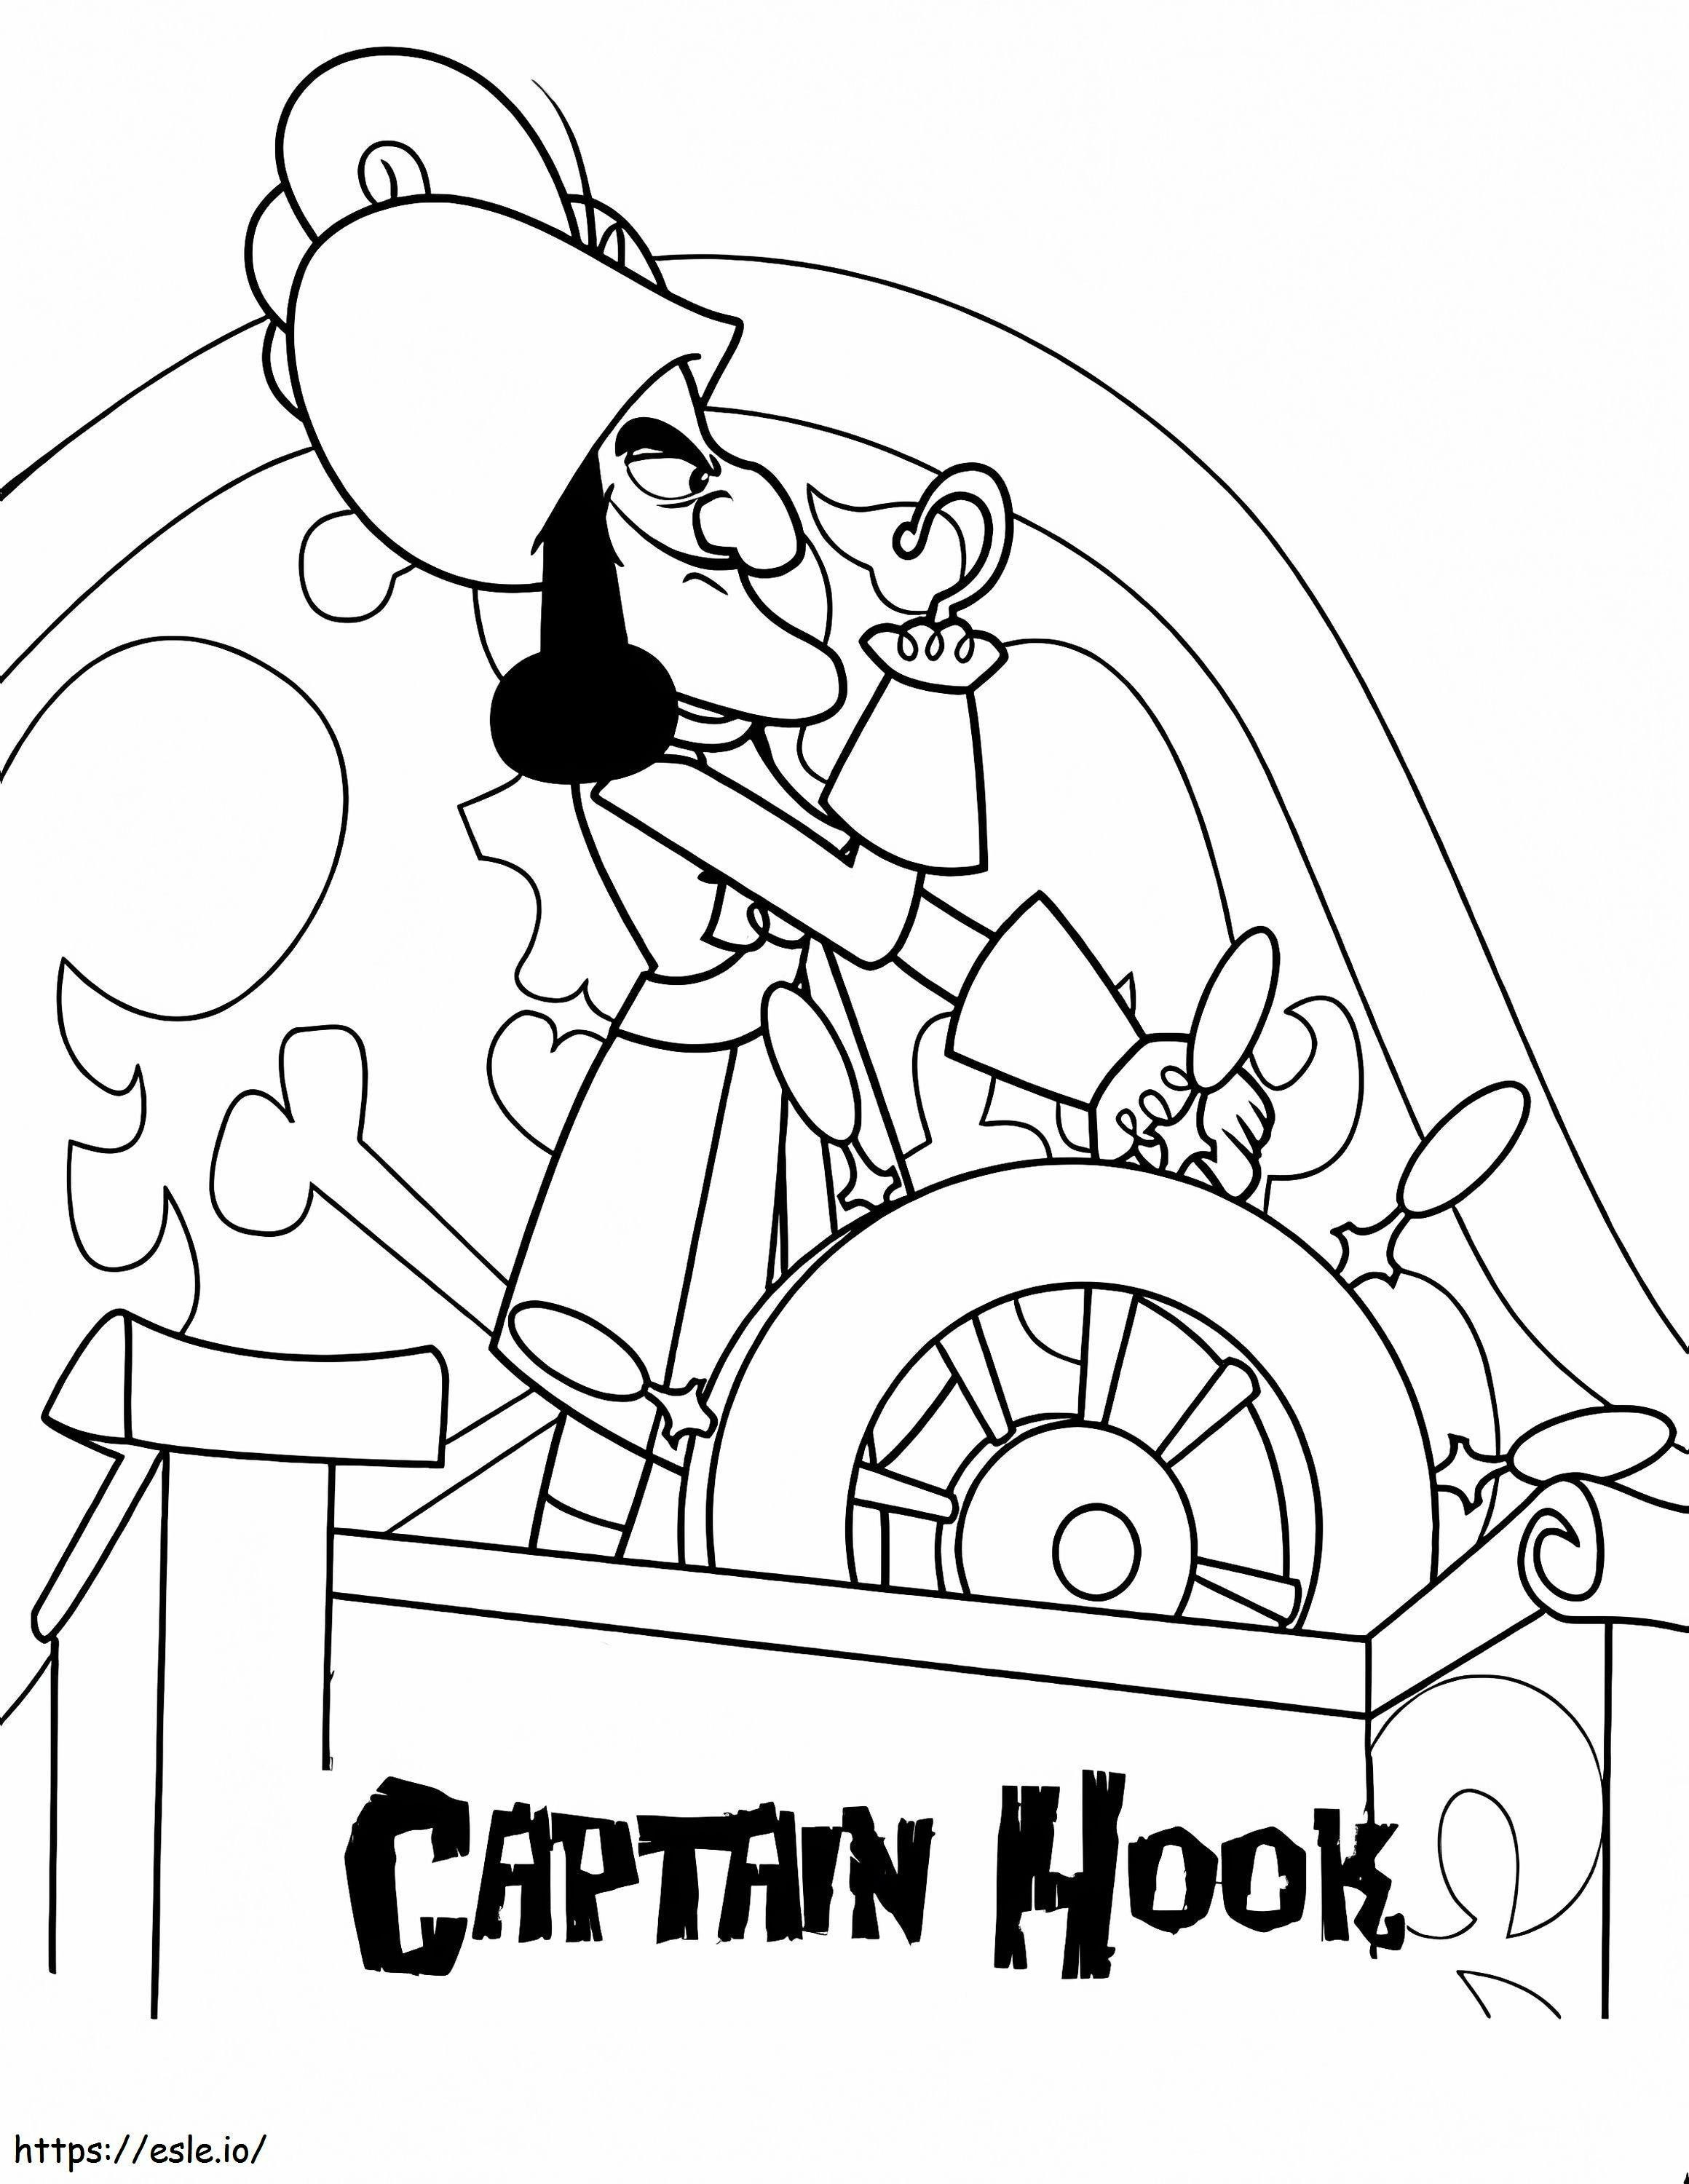 1552289870 Jake And The Neverland Pirates Captain Hook Jake And The Neverland Pirates Captain Hook Color Bros Road Runner Coloring Pictures coloring page